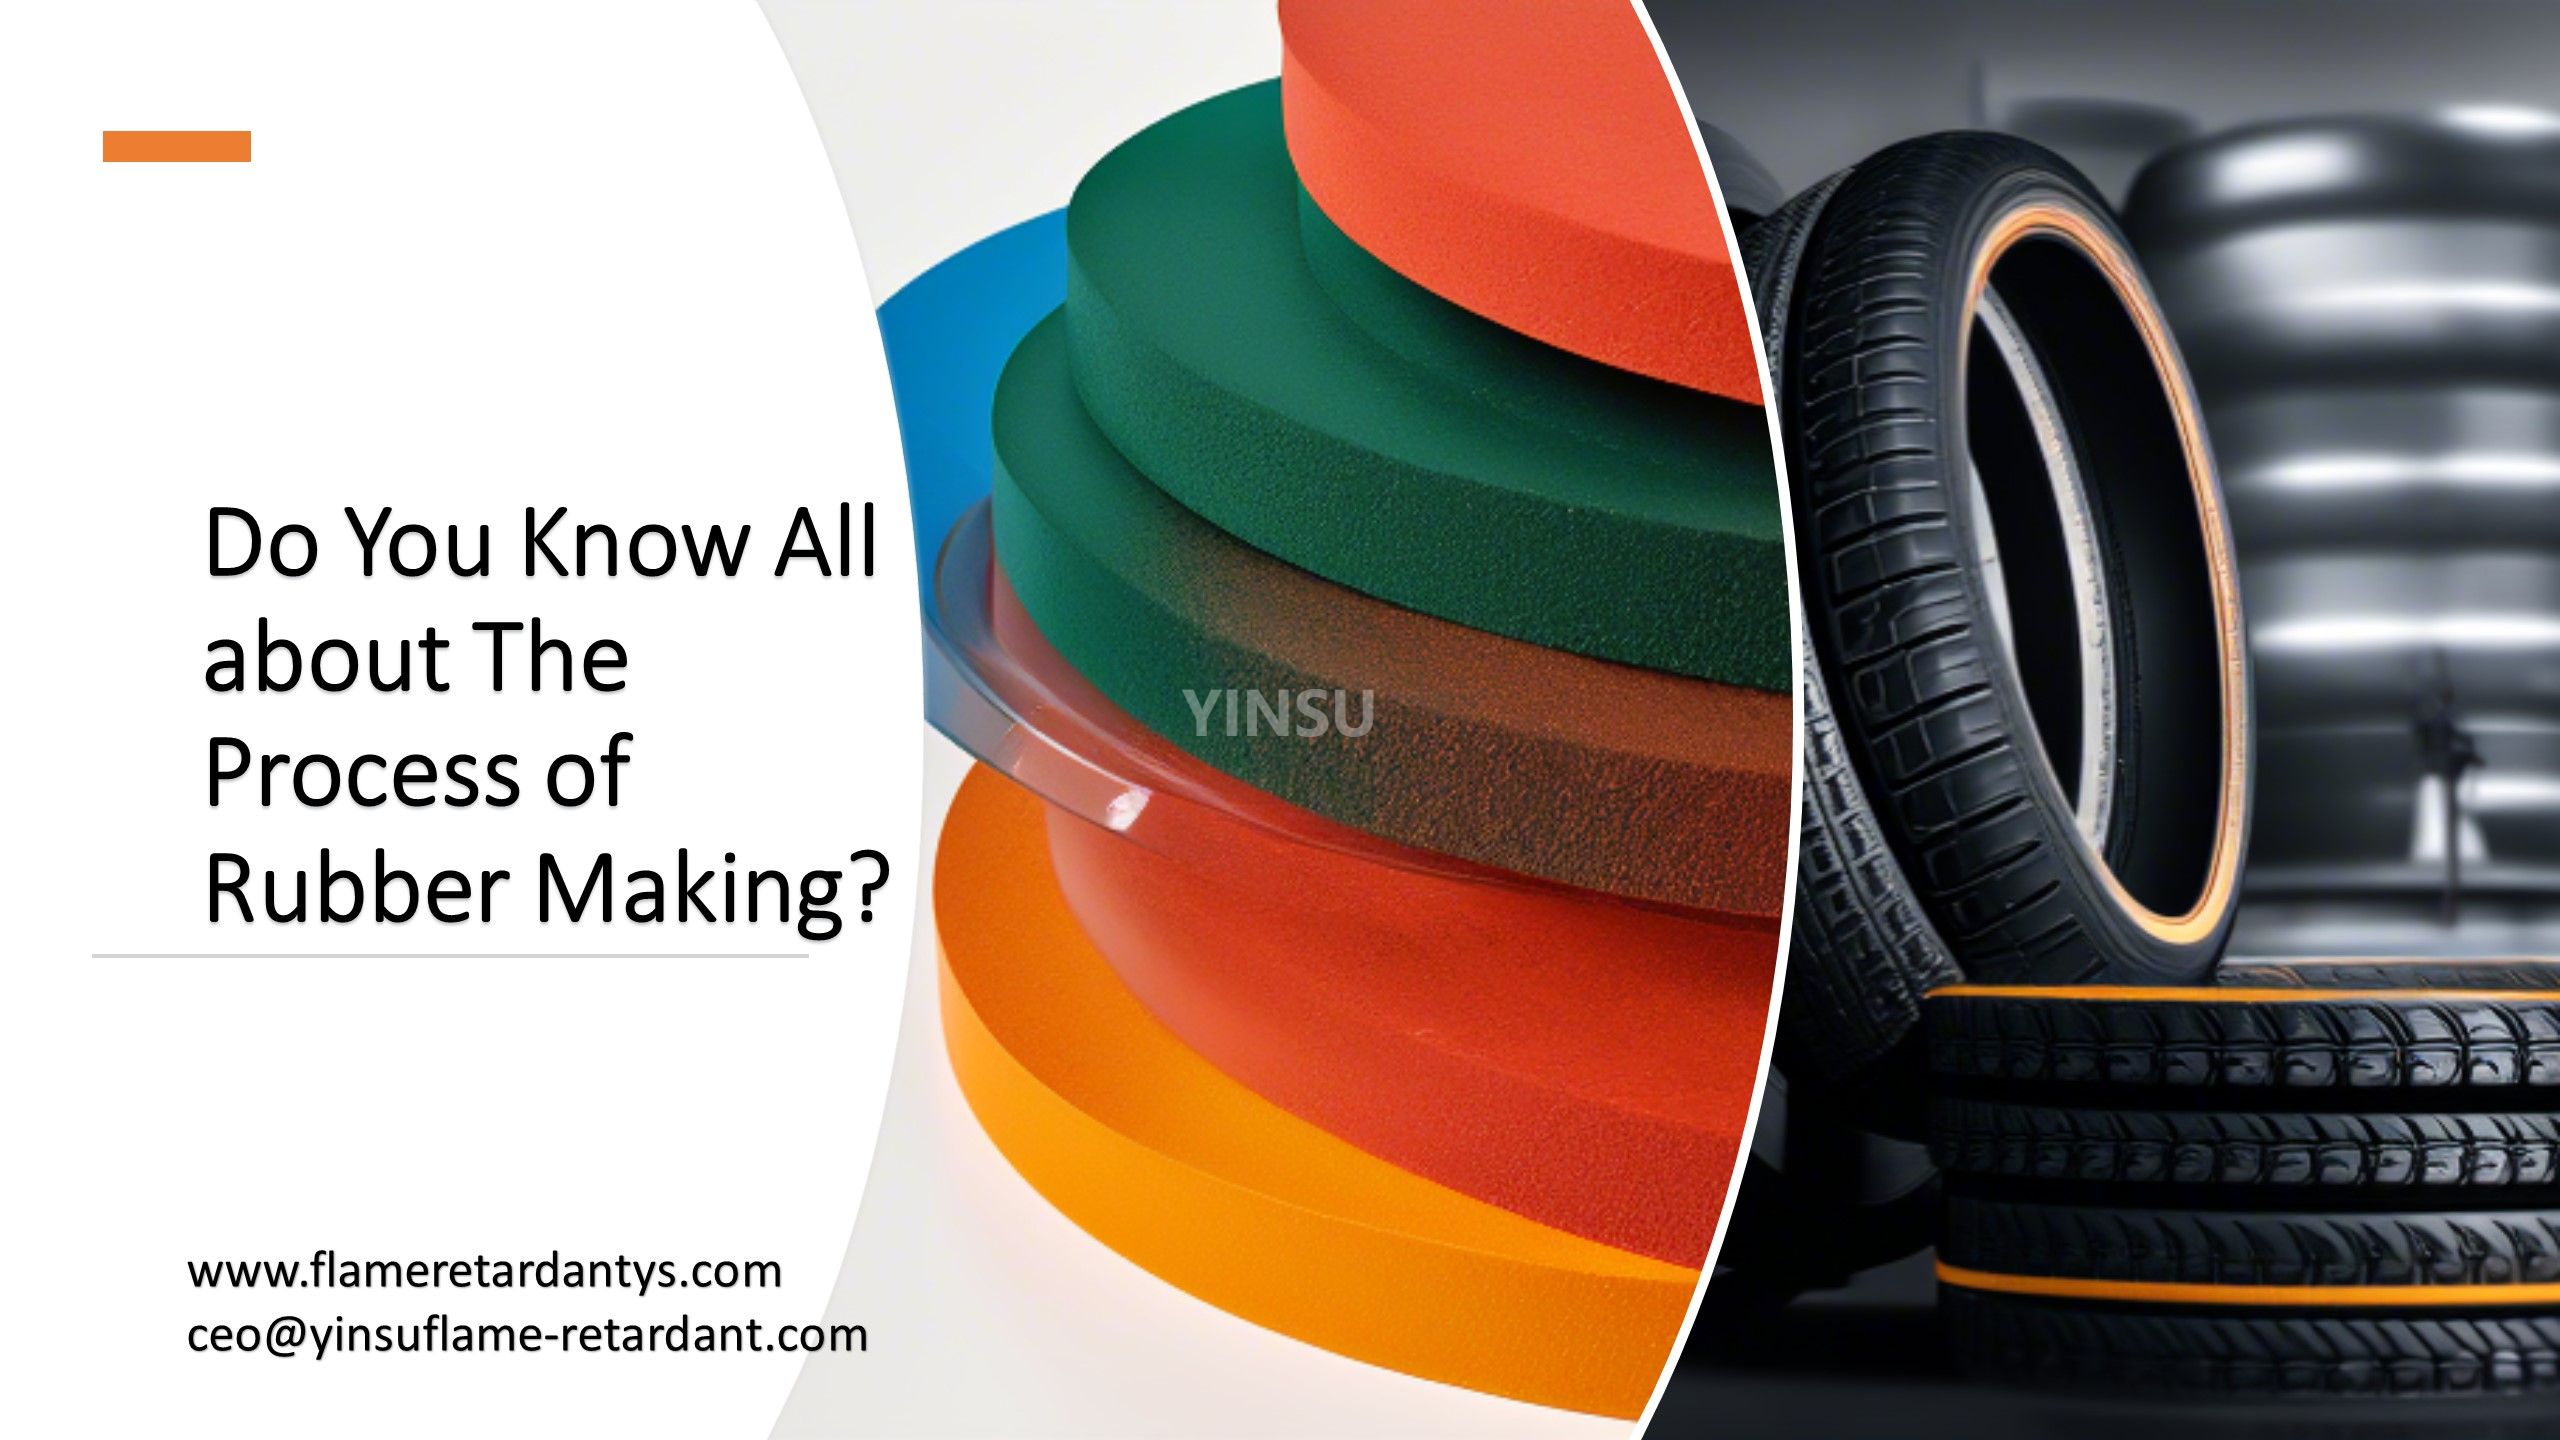 Do You Know All about The Process of Rubber Making